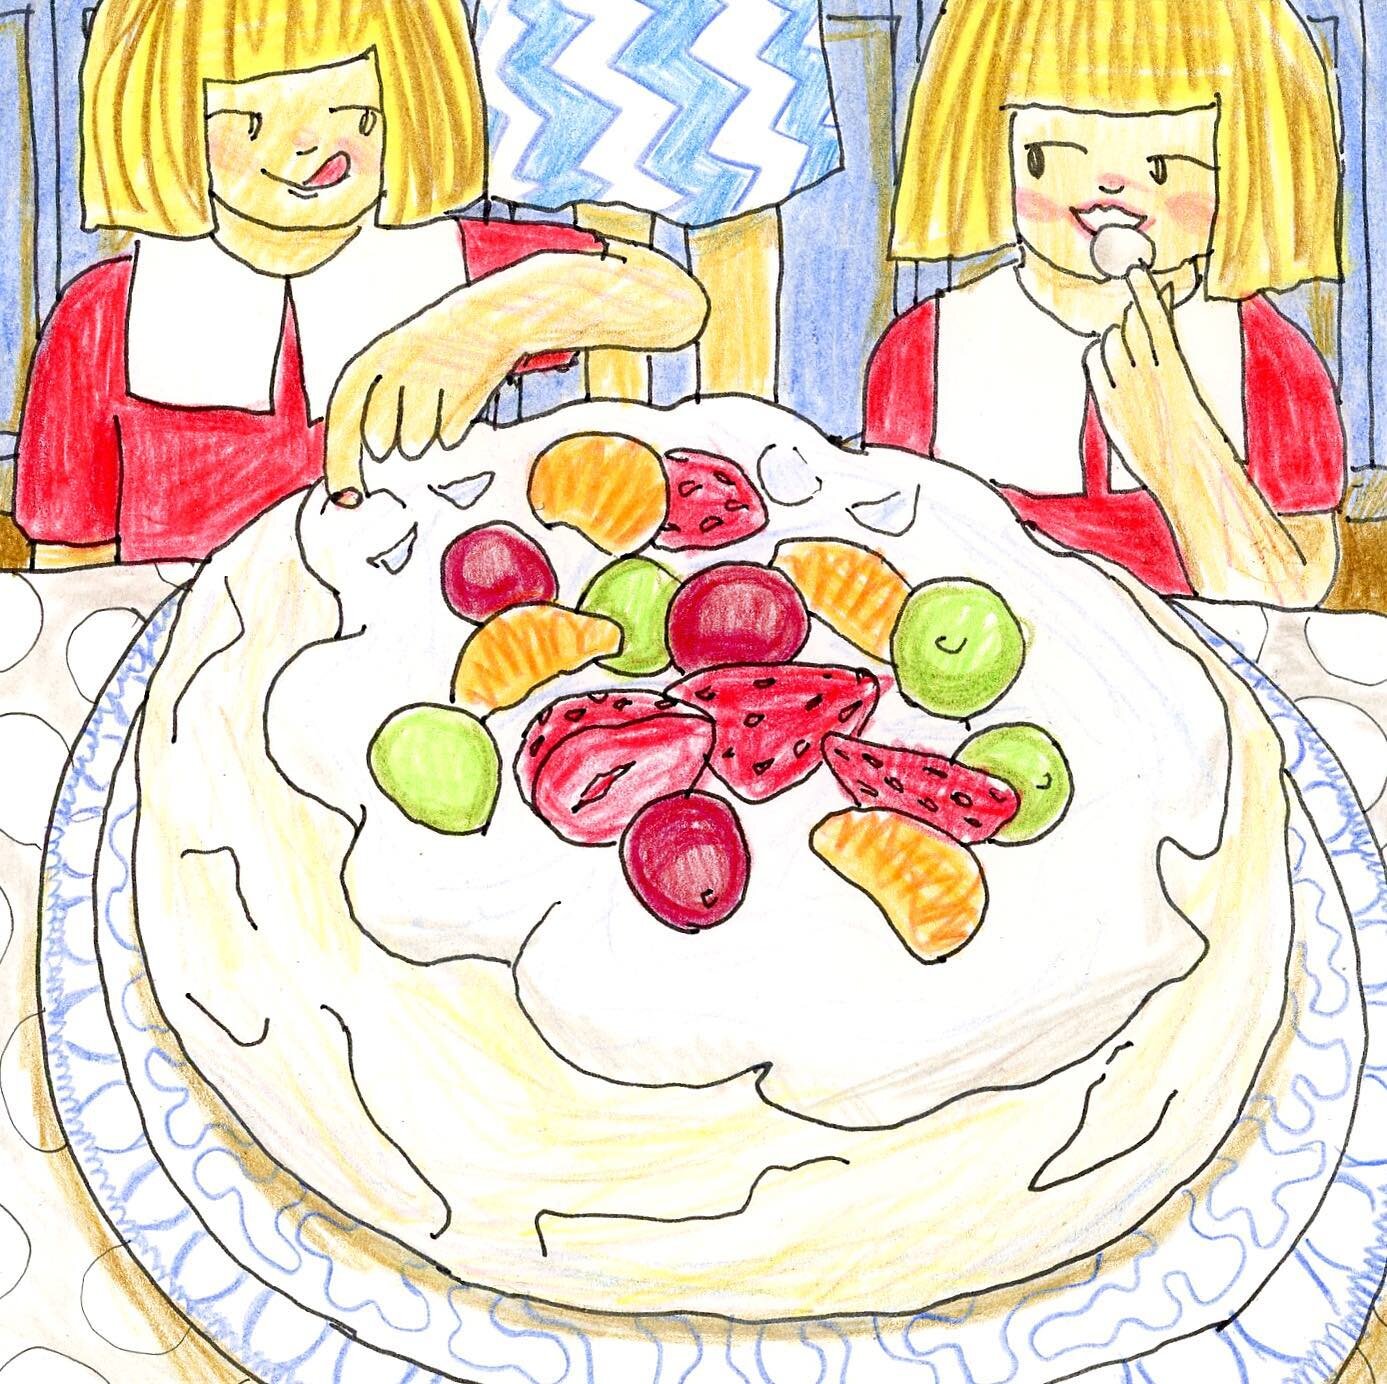 @TheyDrawAndCook Summer draw along: 
Day 31: My favourite summer food - Pavlova!
Thank you @theydrawandcook, this month has been great fun!
.
.
.
.
#theydrawandcook #summerdrawalong #foodillustration #colouredpencils #polychromos #dinnerparty #classi